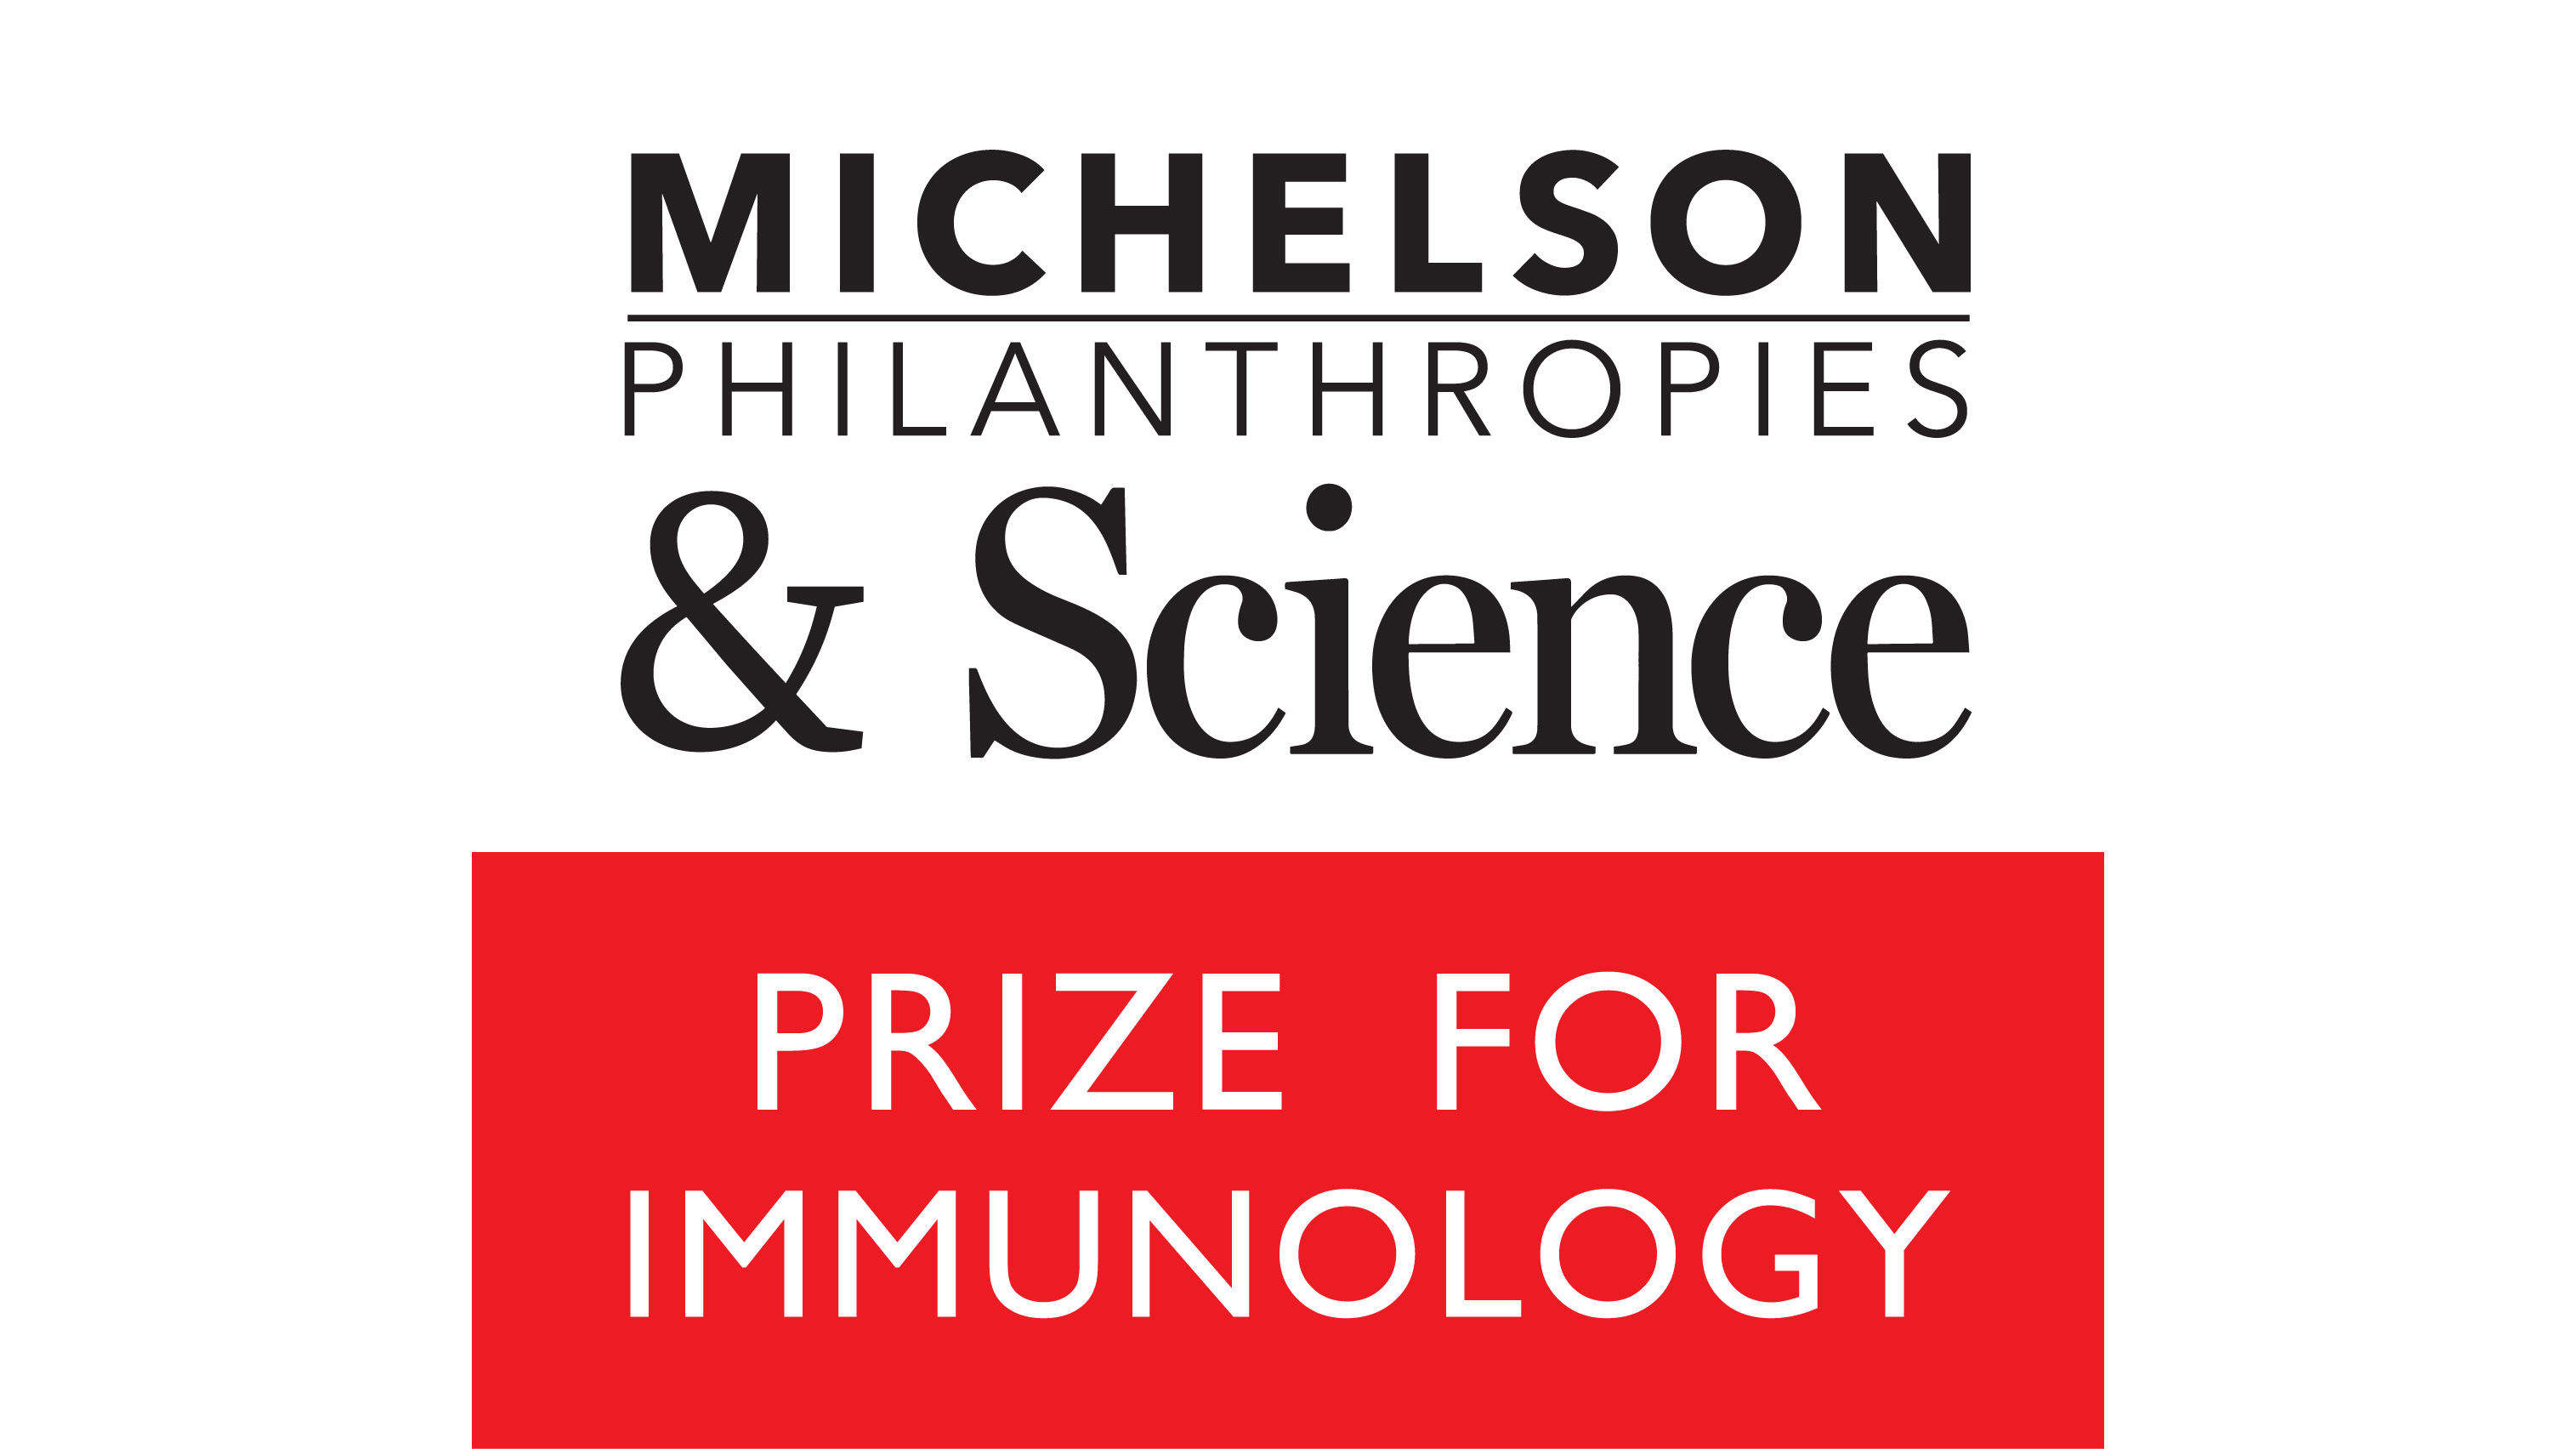 Michelson Philanthropies and Science Prize for Immunology logo